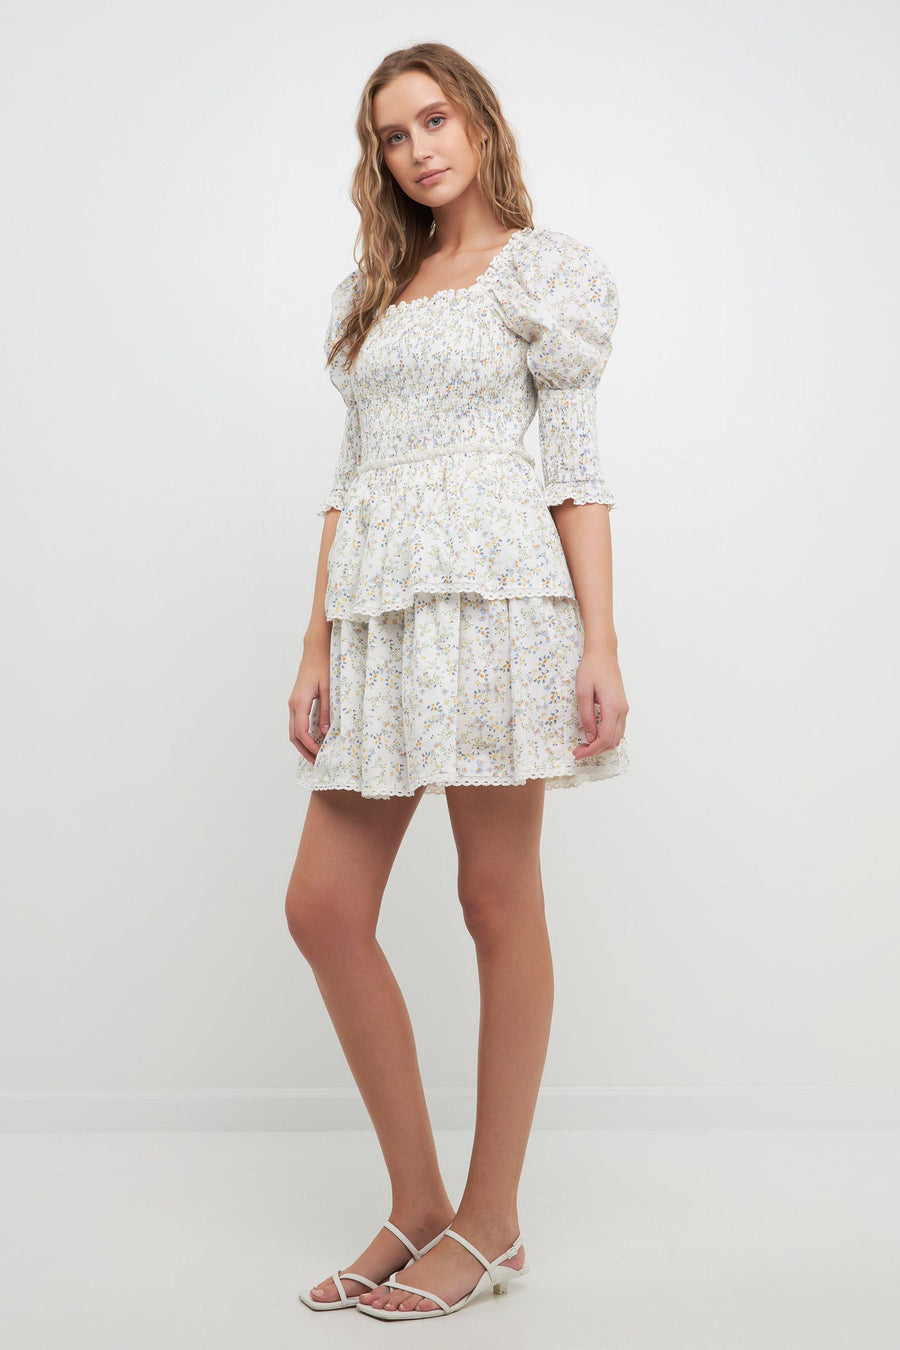 FREE THE ROSES-Lace Trim Floral Print Smocked Sleeve Mini Dress-DRESSES available at Objectrare